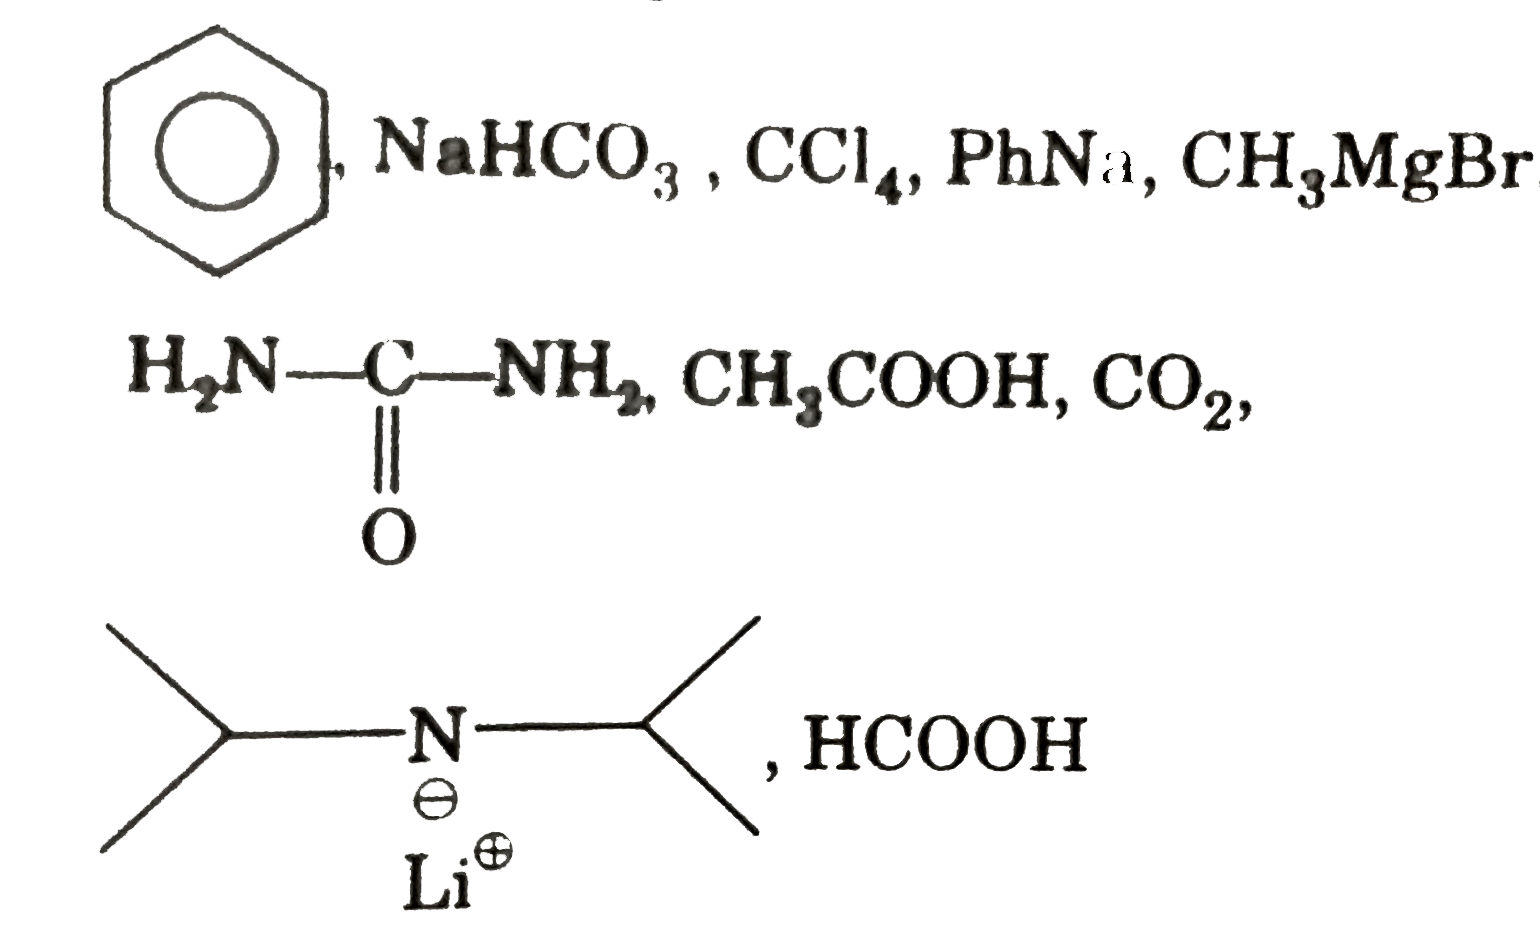 How many compounds are organic compounds among the compounds given below ?